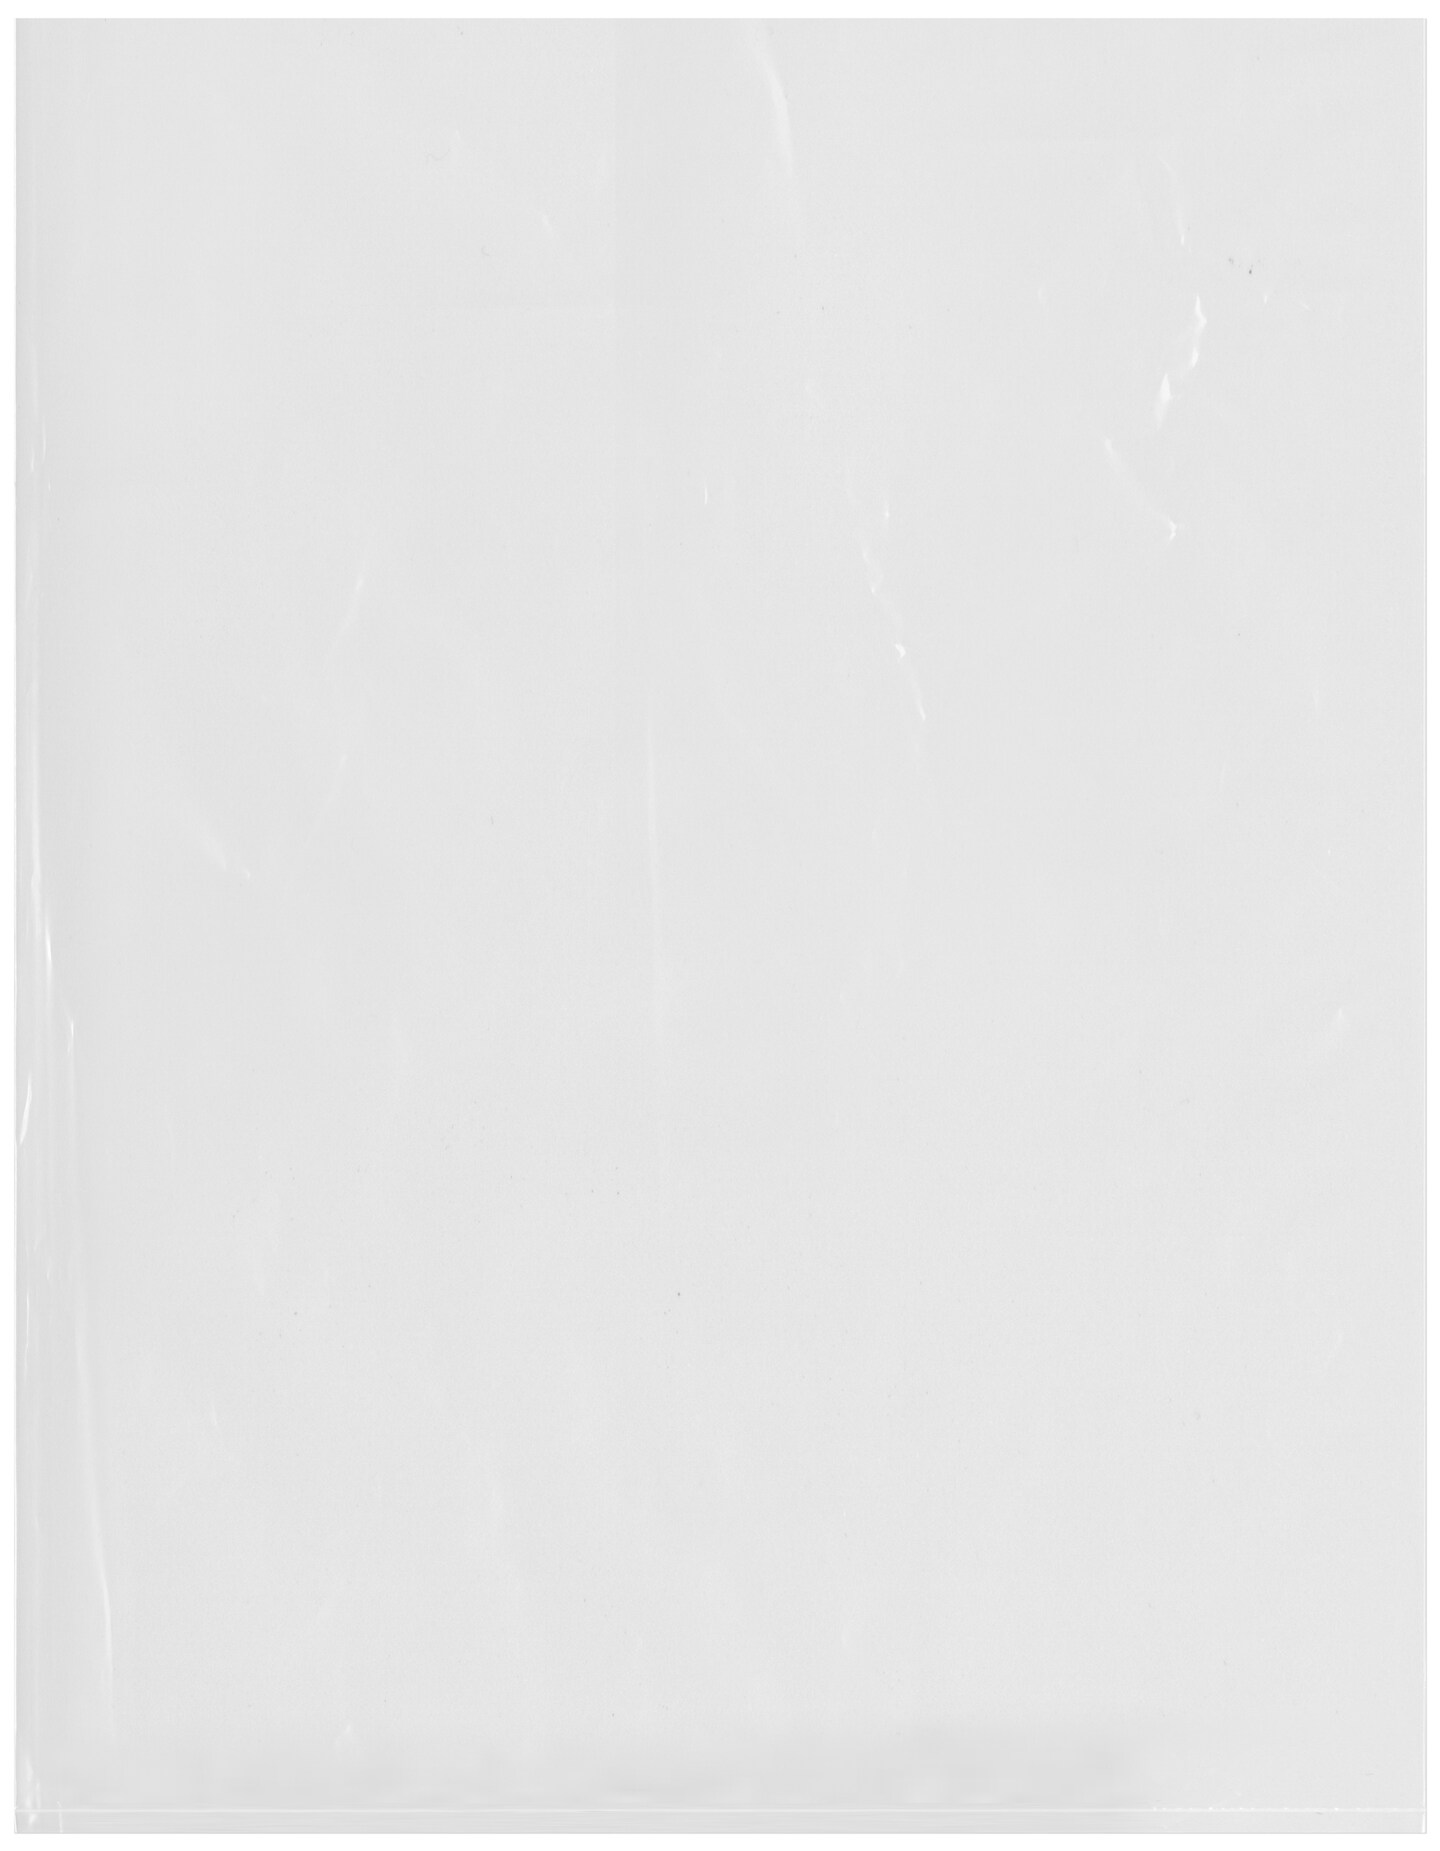 Plymor Flat Open Clear Plastic Poly Bags, 1.25 Mil, 14